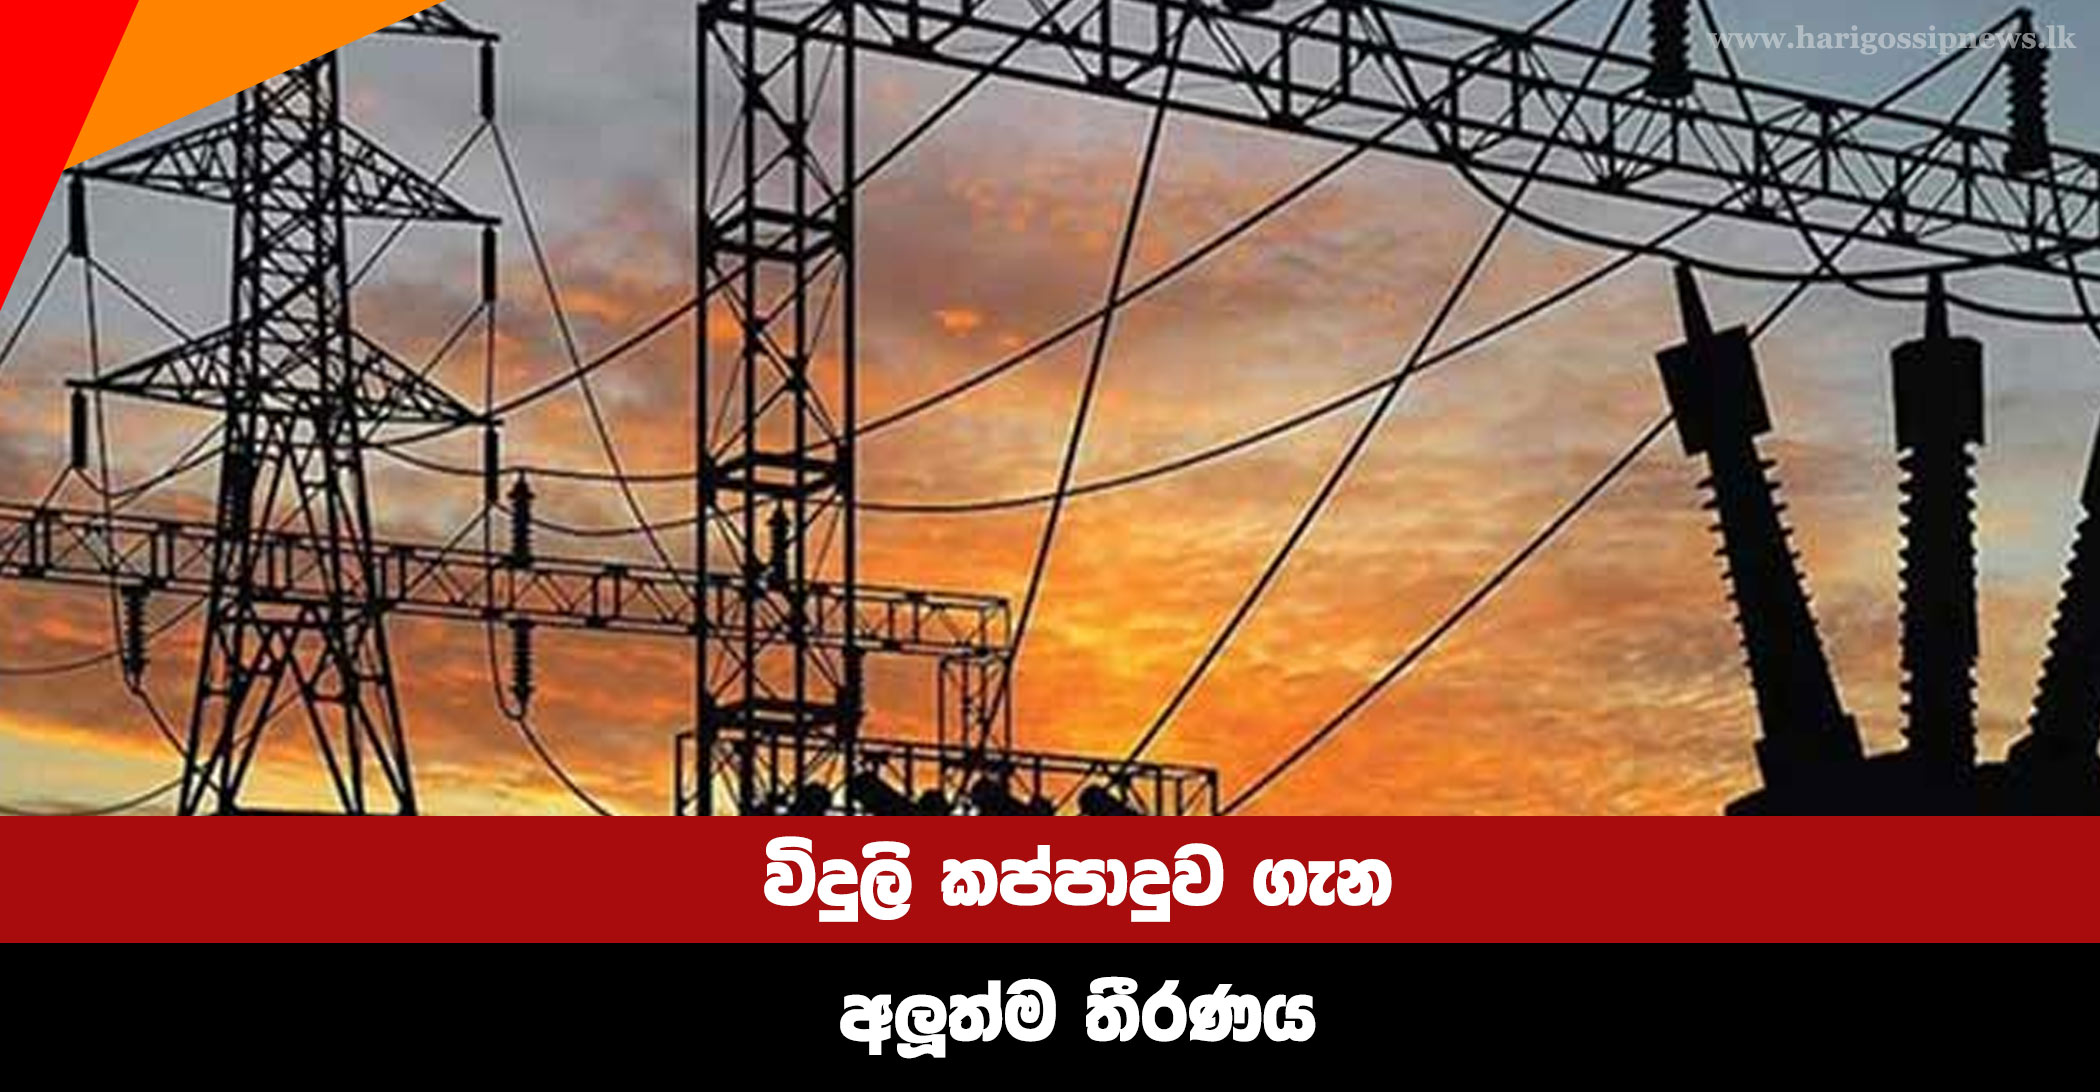 The latest decision on power cuts